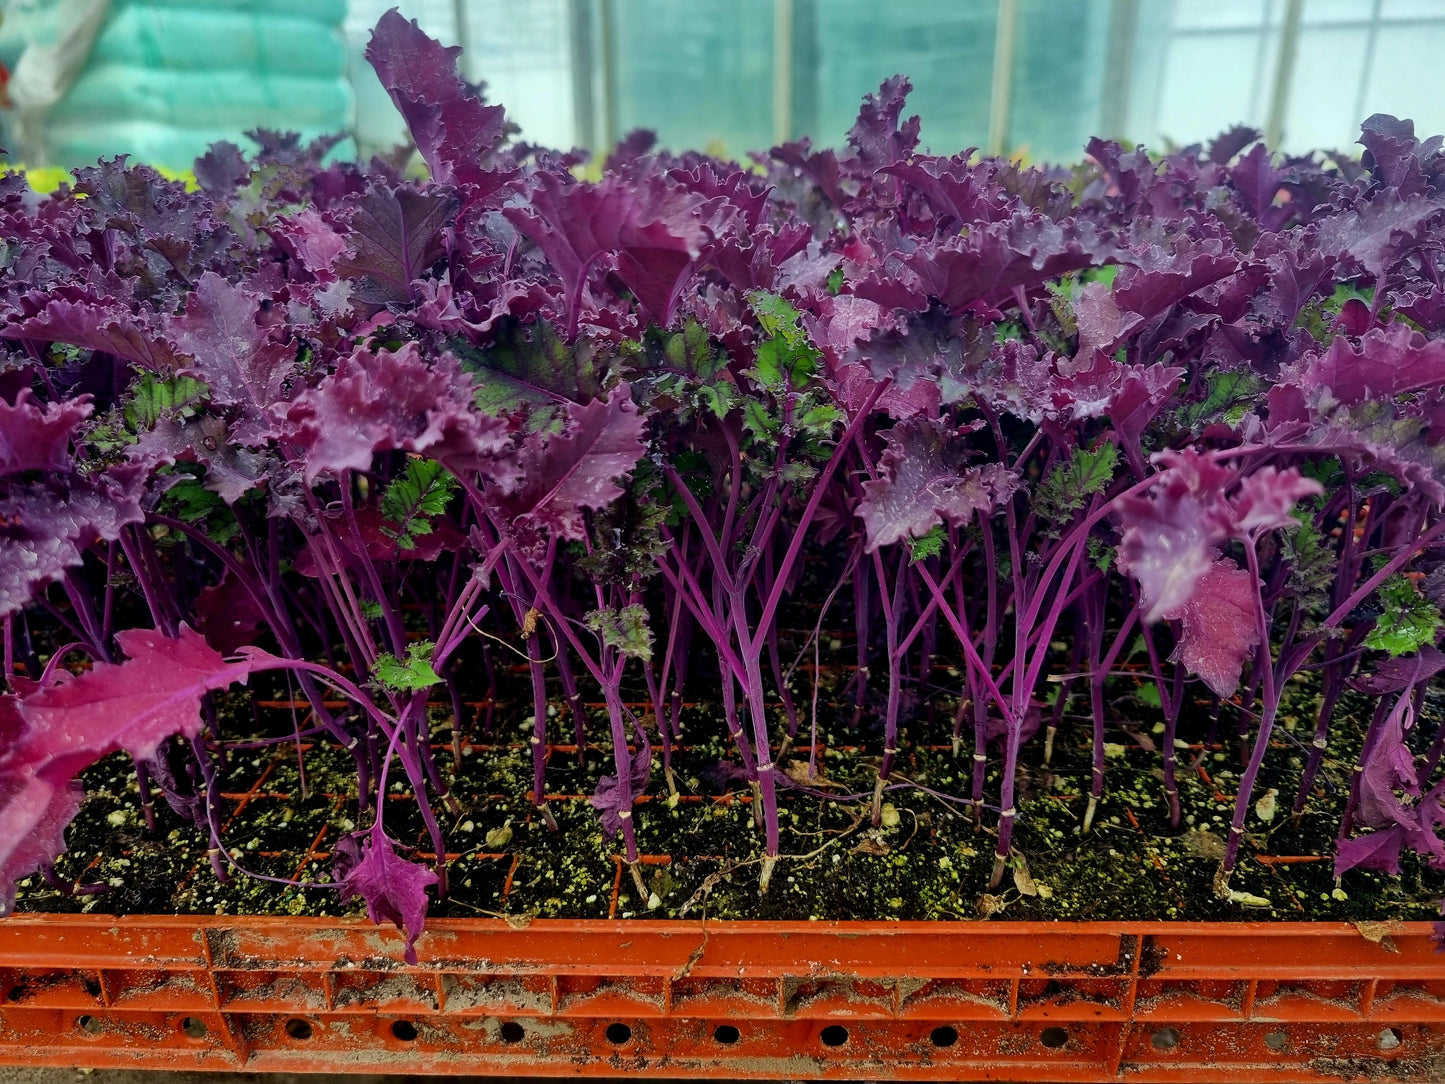 Red Kale Plug Plants "Grow Your Own" Vegetables **Letterbox Friendly**